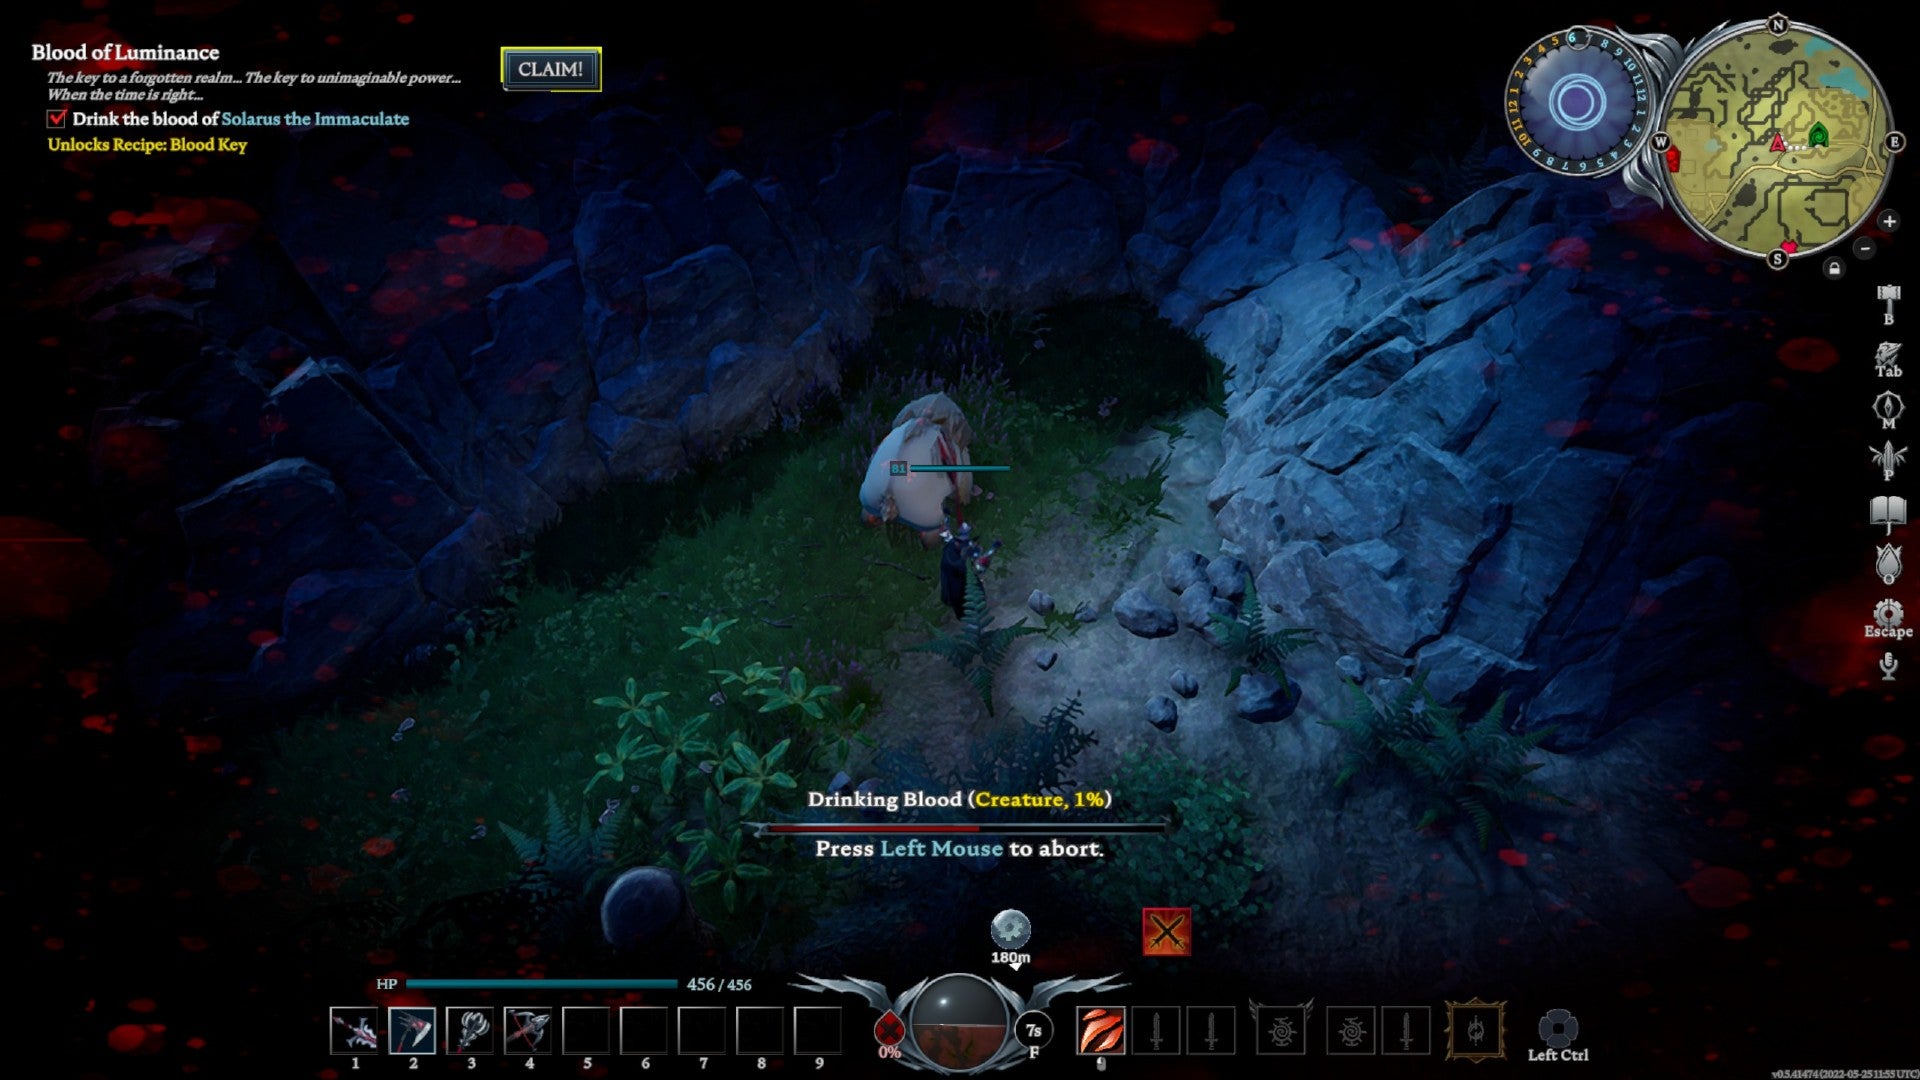 V Rising player feeding on a bear with creature blood type and 1% blood quality in a dark forest.